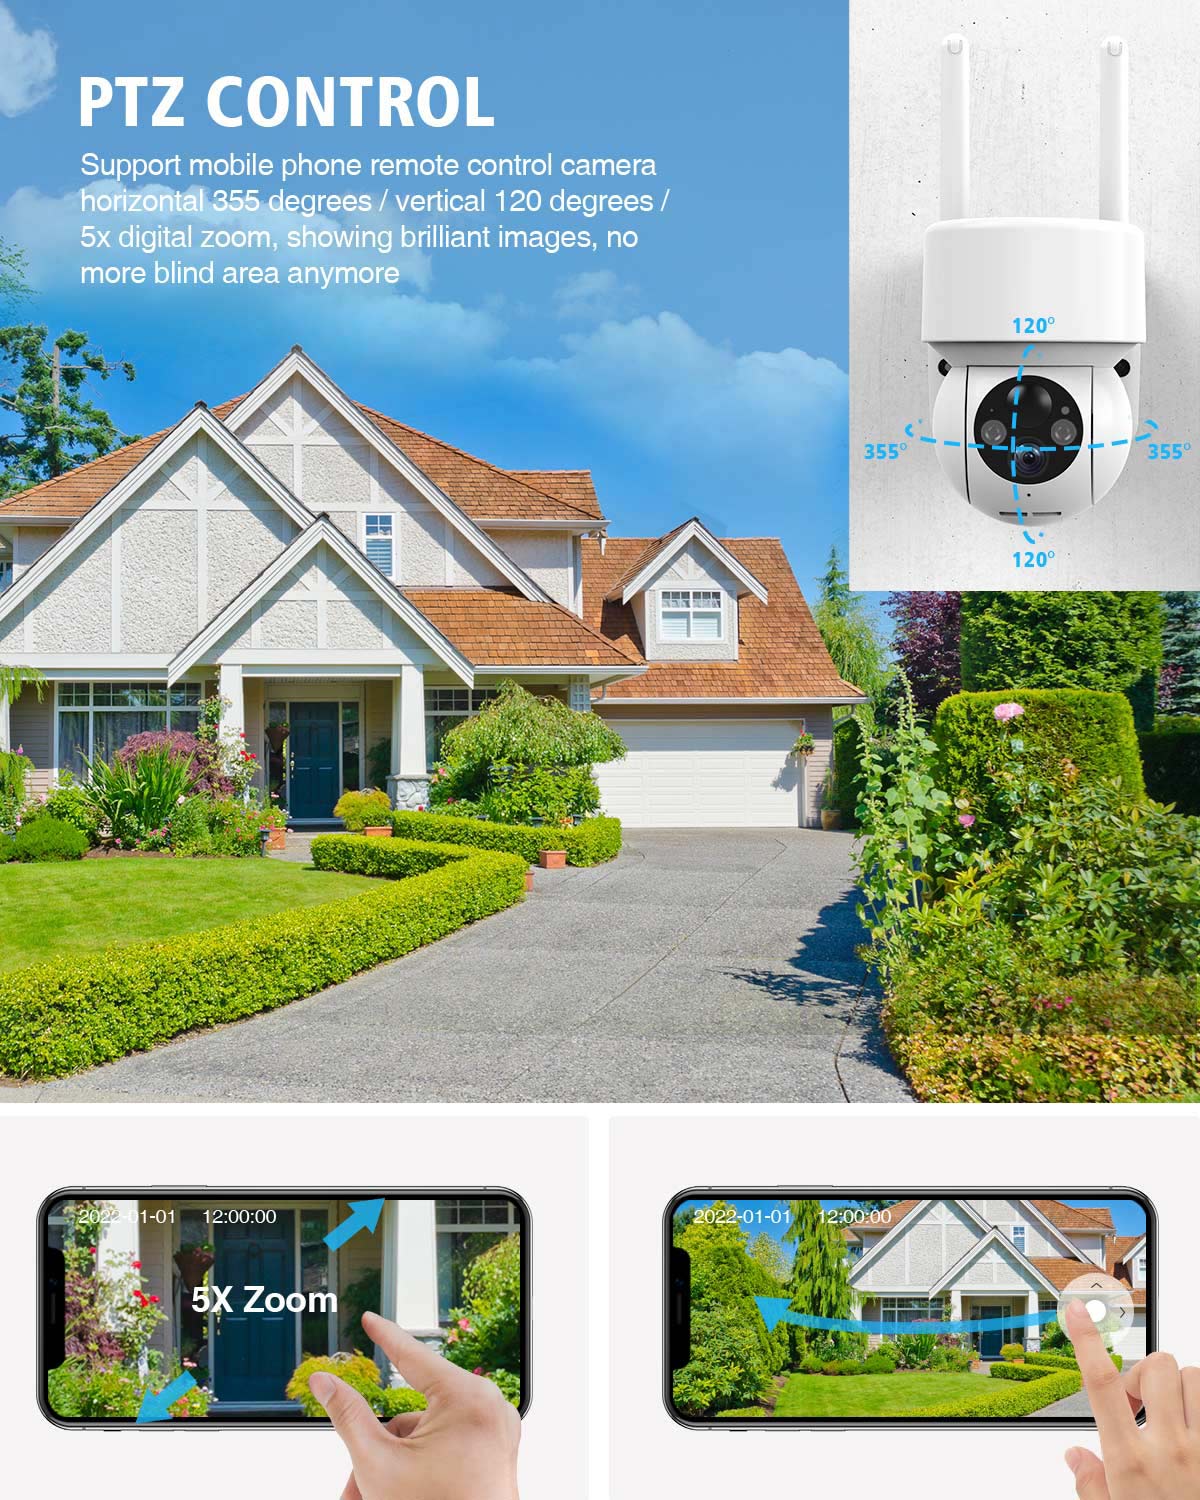 Toguard SC500 1080P Color Night Vision Wireless Security Camera (Only Available In Europe, The UK)